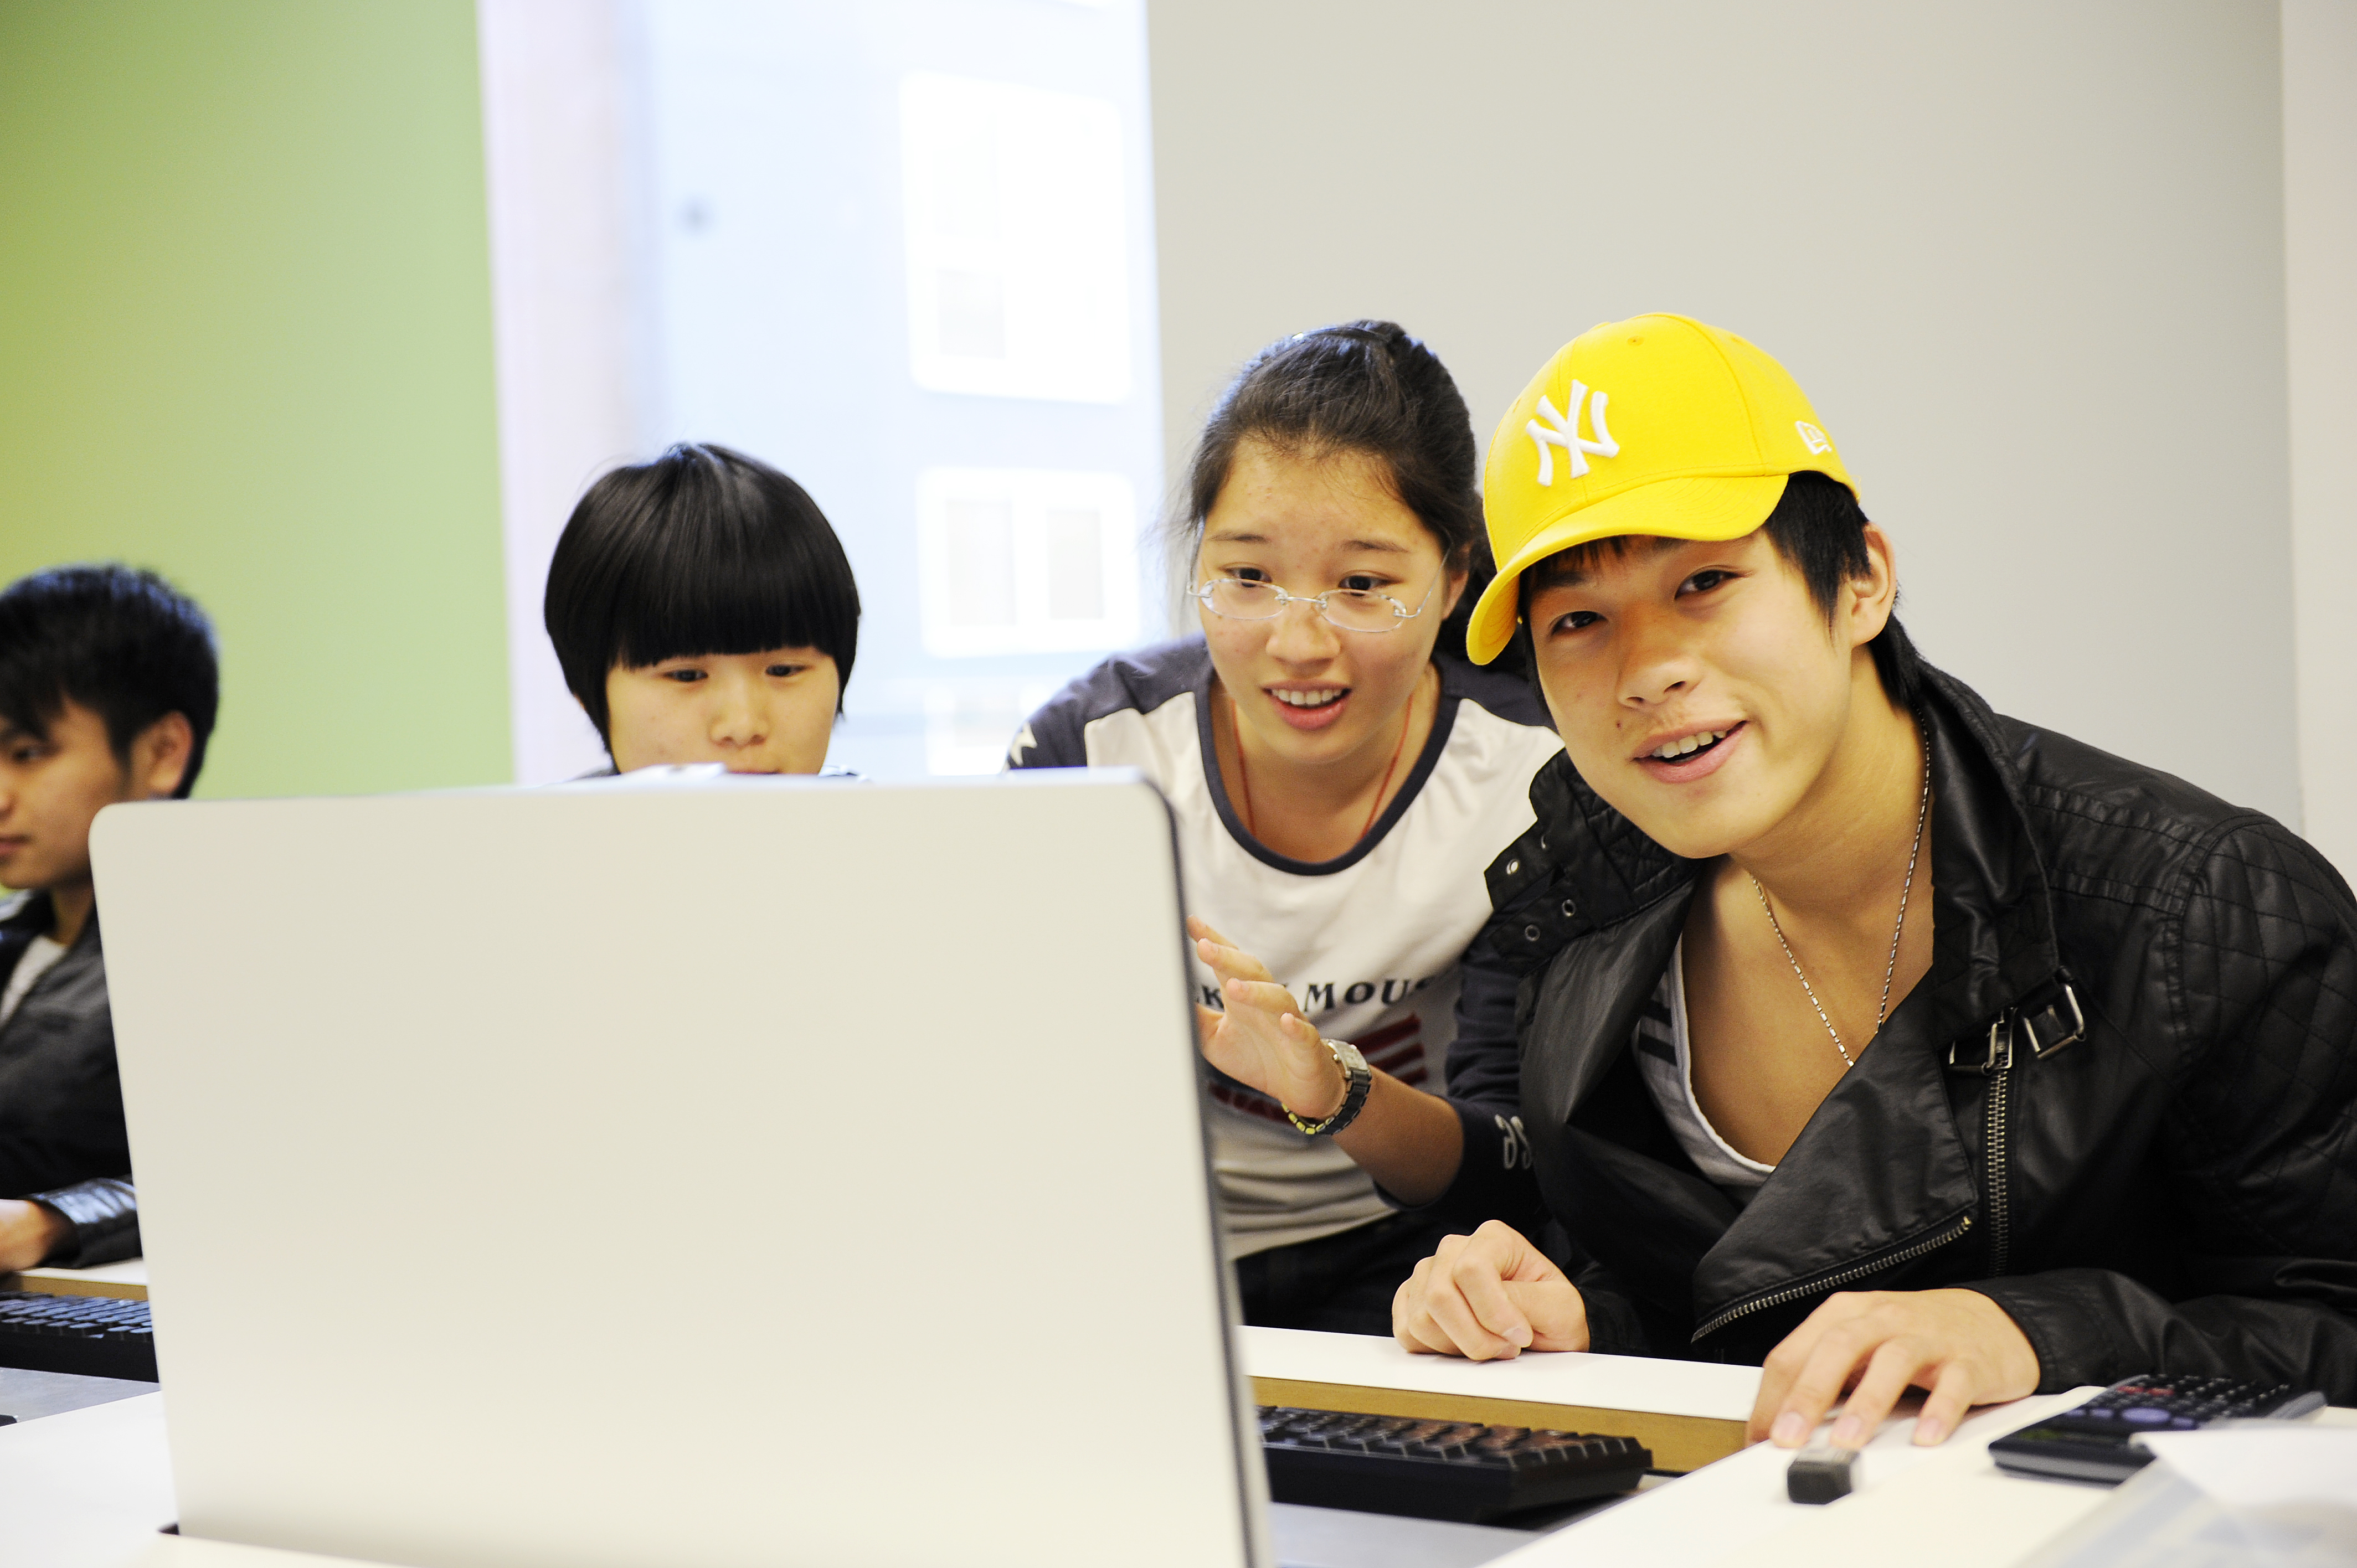 A group of three INTO International students are gathered around a desk-integrated computer